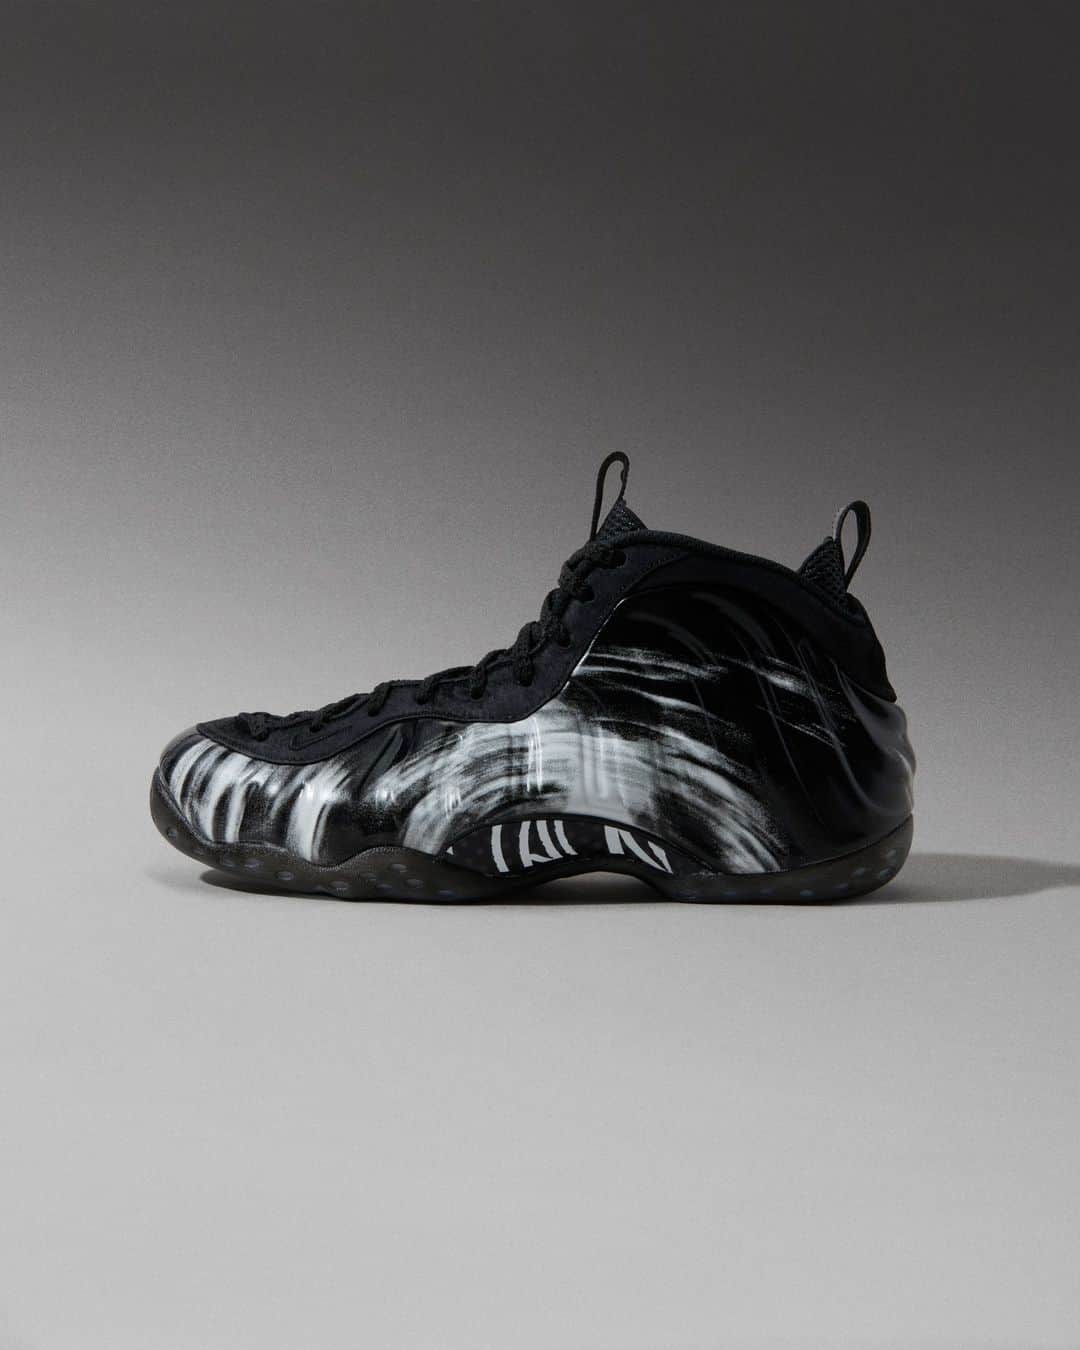 Flight Clubのインスタグラム：「The Air Foamposite One 'Dream A World' outfits the '90s model in a surreal look, cloaking the blacked-out Foamposite upper in hazy white brush strokes. Empowering messages like 'Insert Your Dreams Here' and 'Dream a World' land on the insole. Penny Hardaway's classic '1 Cent' logo anchors the shoe to its hardwood roots.」